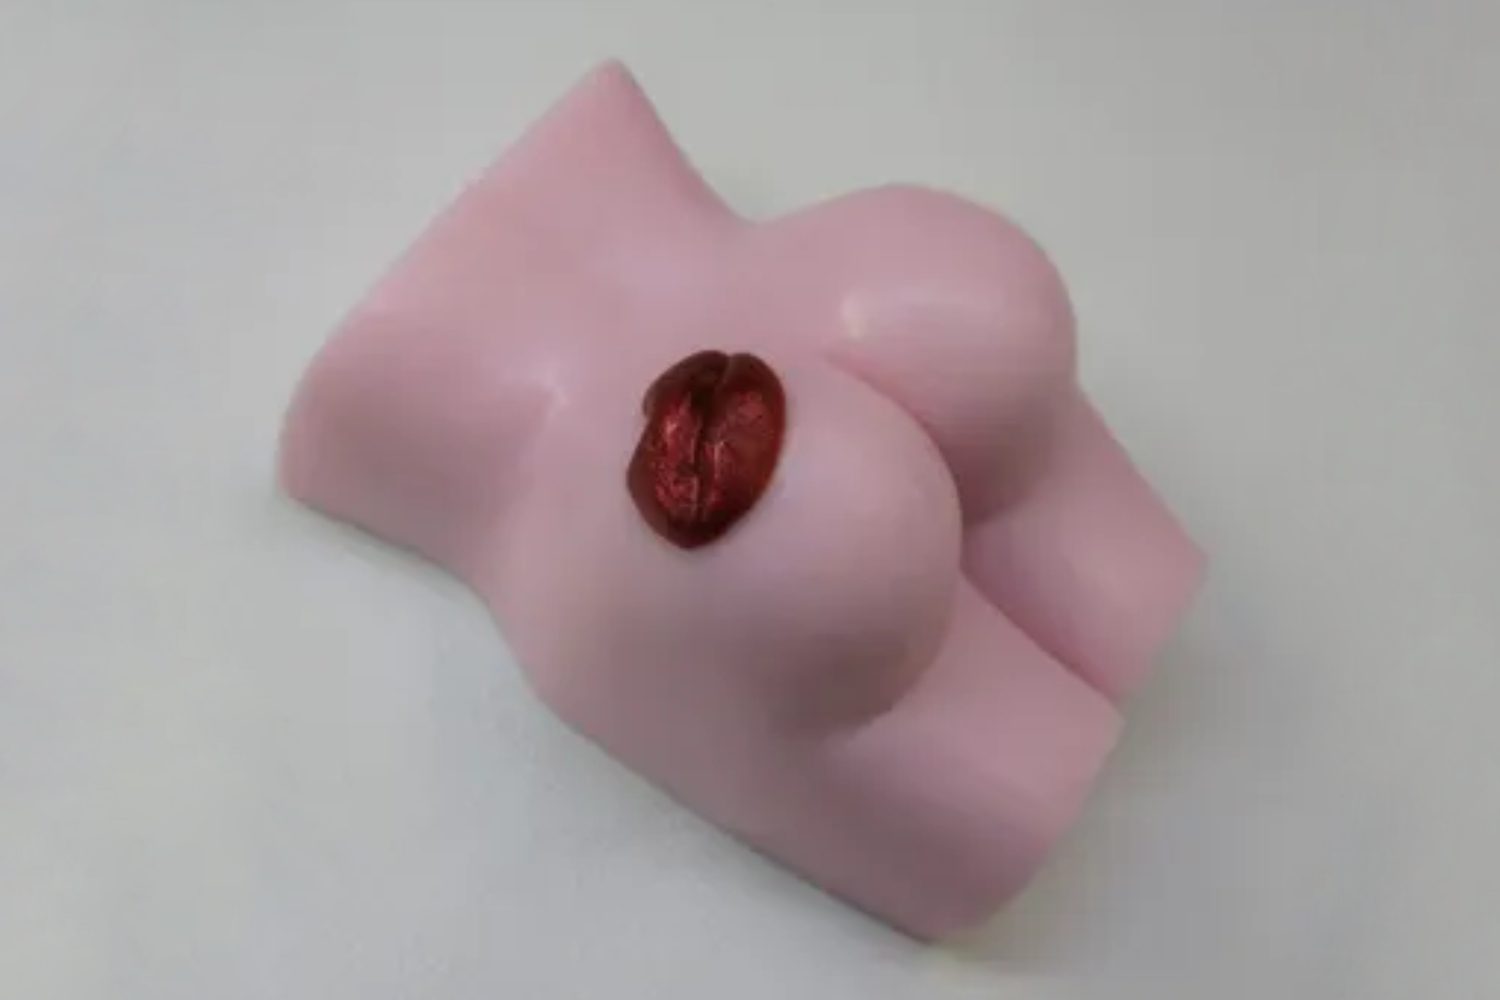 A pink toy shaped like a woman 's breast.